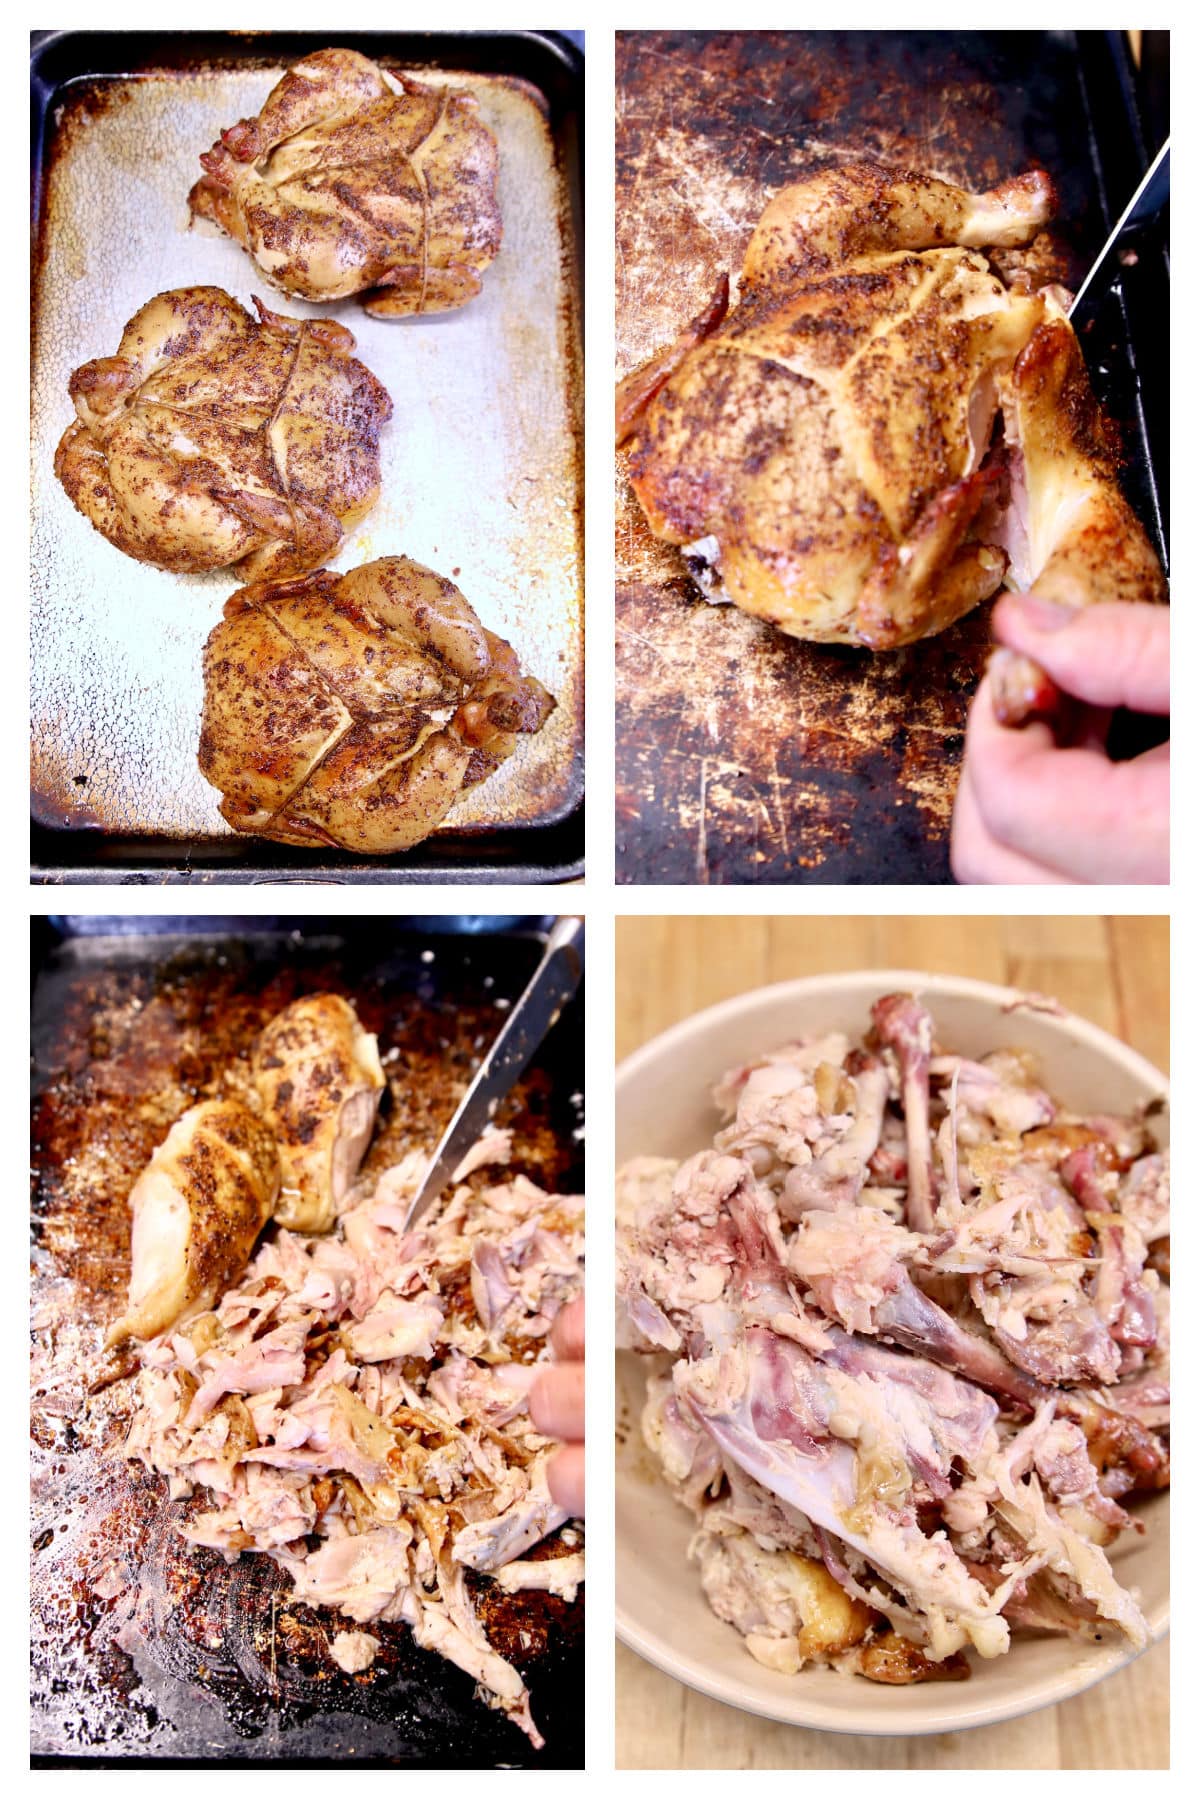 Collage cutting up whole chicken for meal prep.